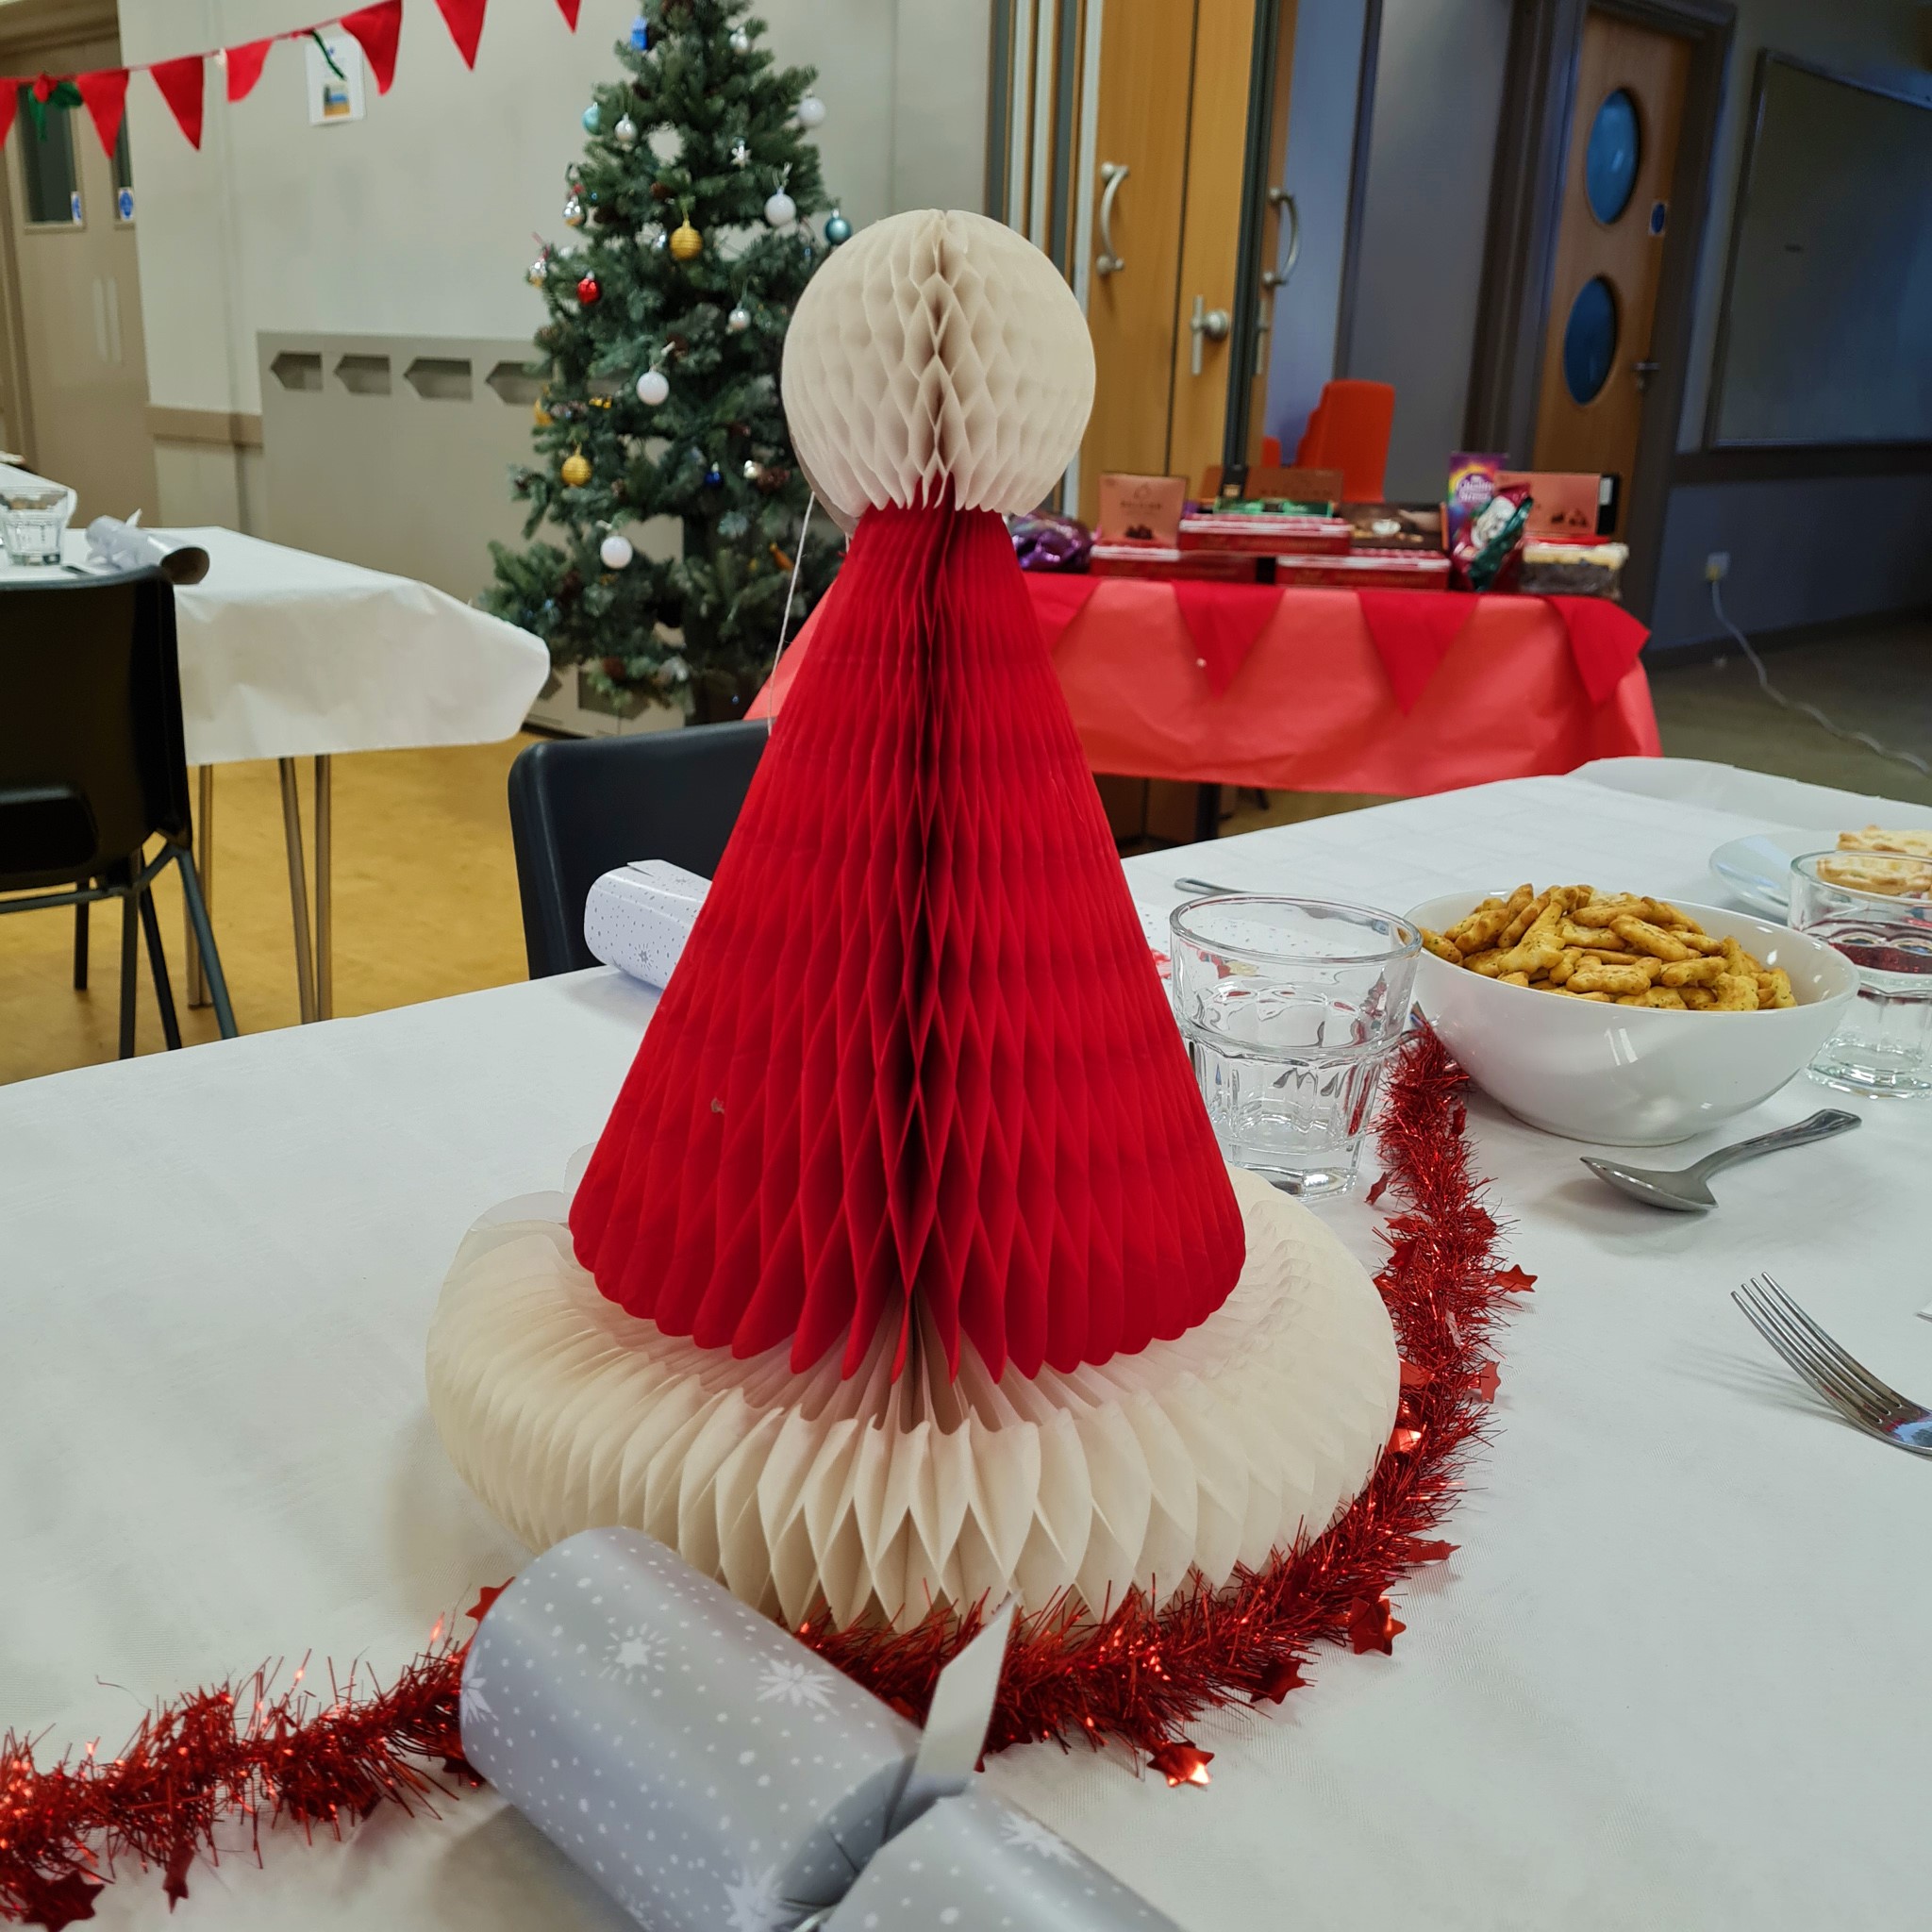 Christmas Santa hat decoration on decorated table before lunch. Christmas tree and gifts for guests in the background.